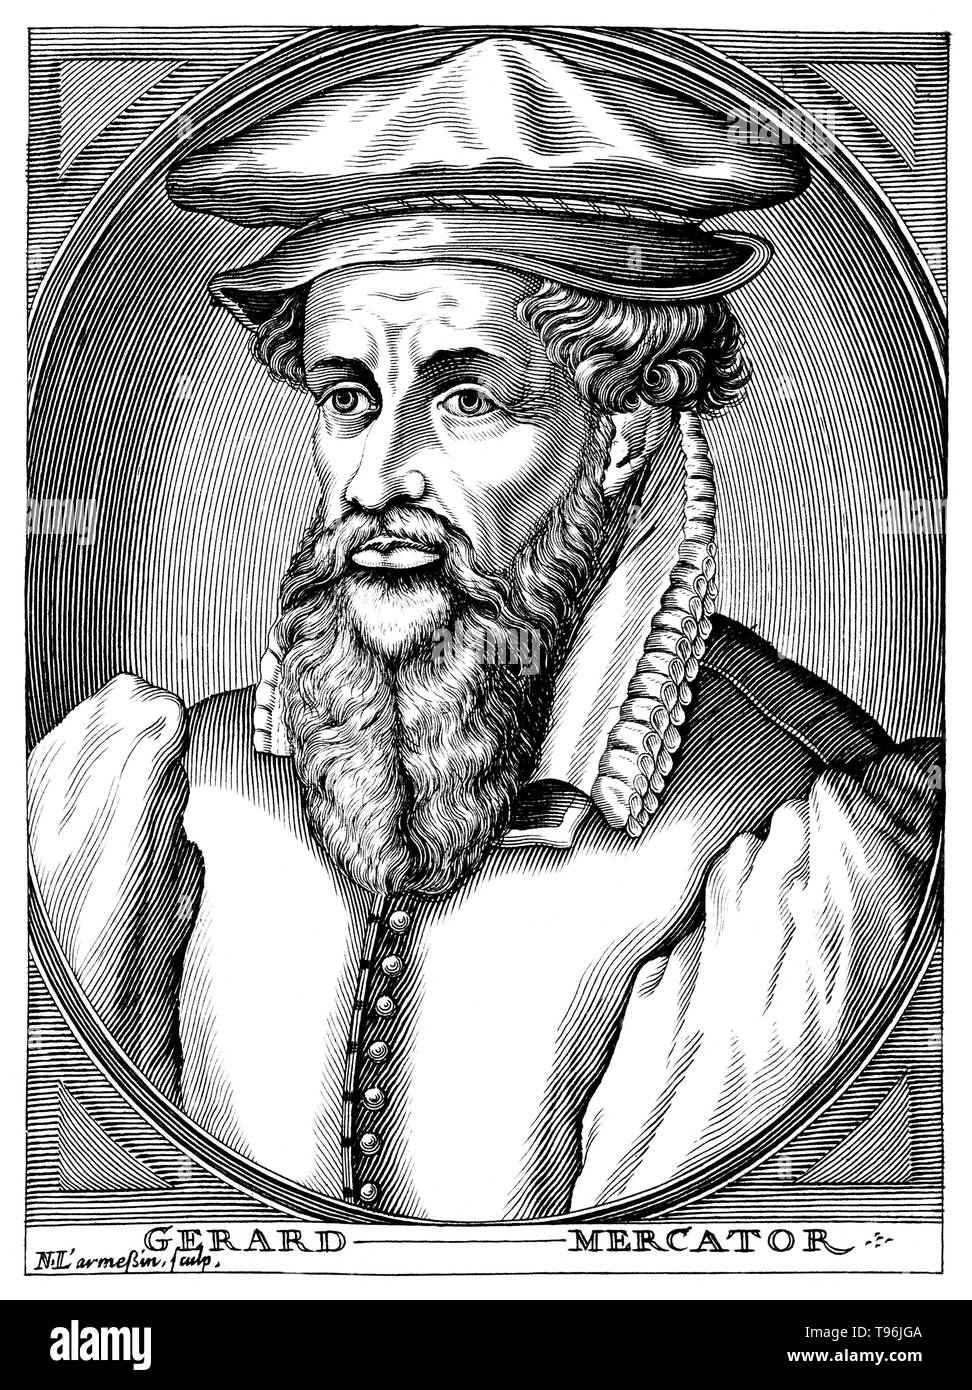 Gerardus Mercator (March 5, 1512 - December 2, 1594) was a Flemish cartographer. His map-making began when he produced a map of Palestine in 1537. In 1538 he produced a map of the world. In 1564 he was appointed Court Cosmographer to Wilhelm, Duke of Jülich-Cleves-Berg. In 1569 he constructed a new chart, the Mercator projection, a cylindrical map projection. Stock Photo